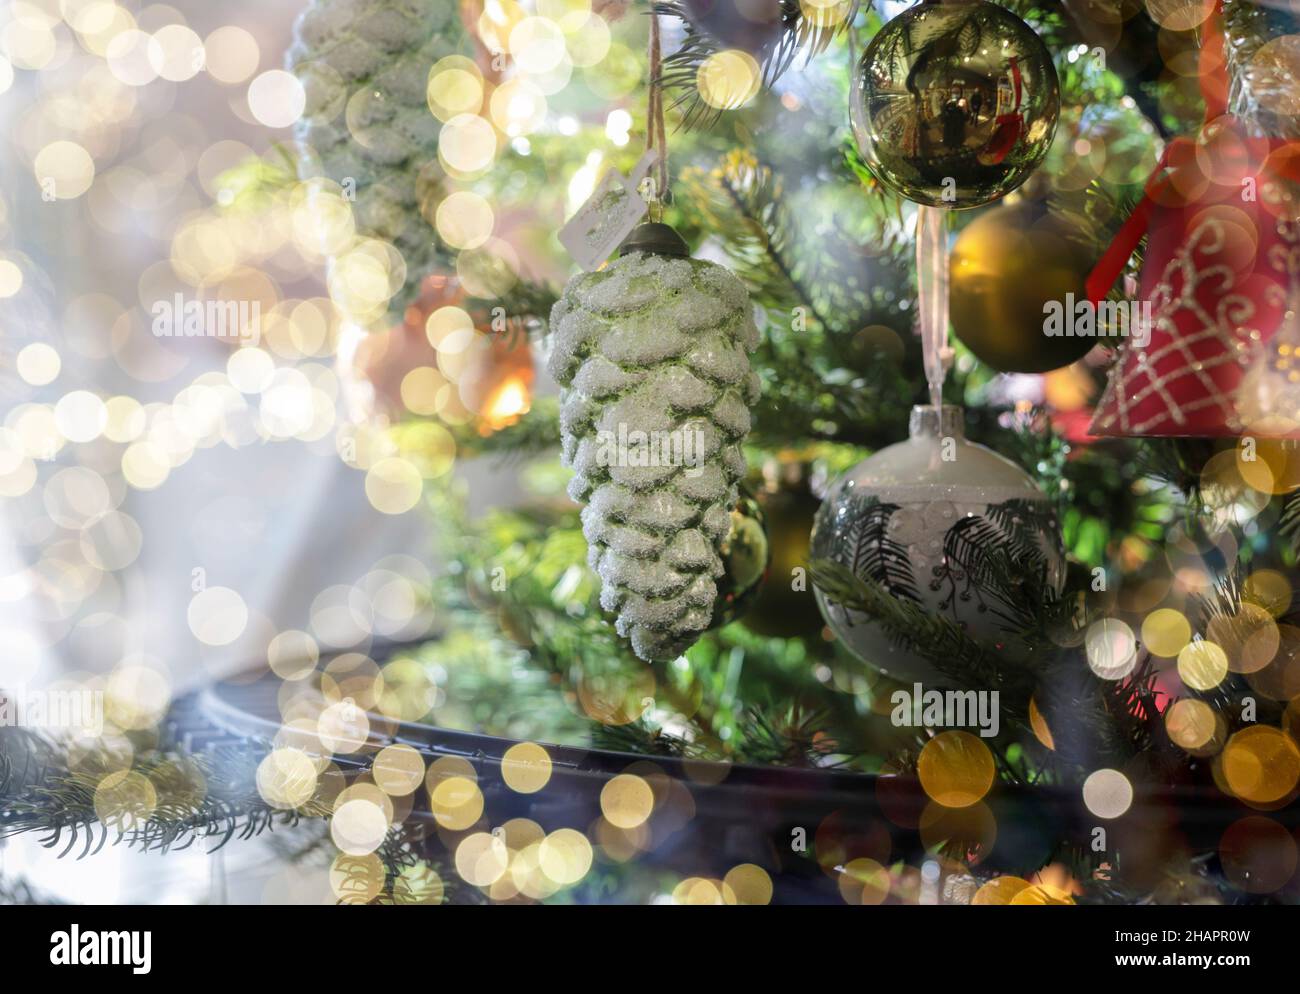 Cone toy hanging on Christmas fir tree close up. Xmas ornament on firtree. Stock Photo